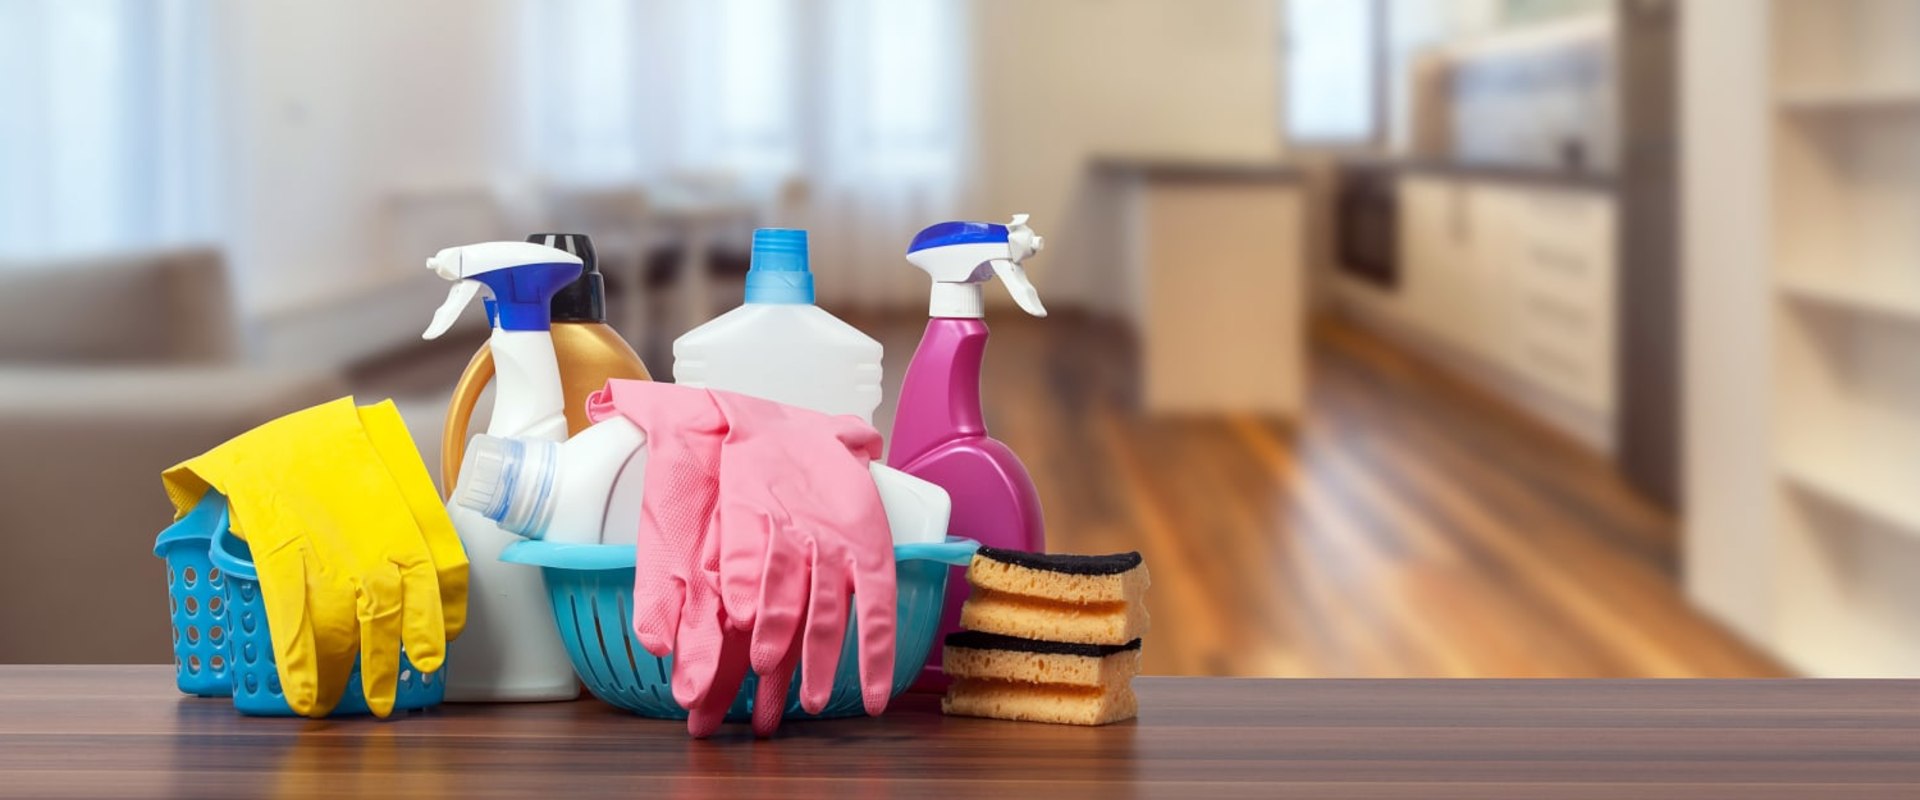 The Ultimate Spring Cleaning Checklist for Your Home